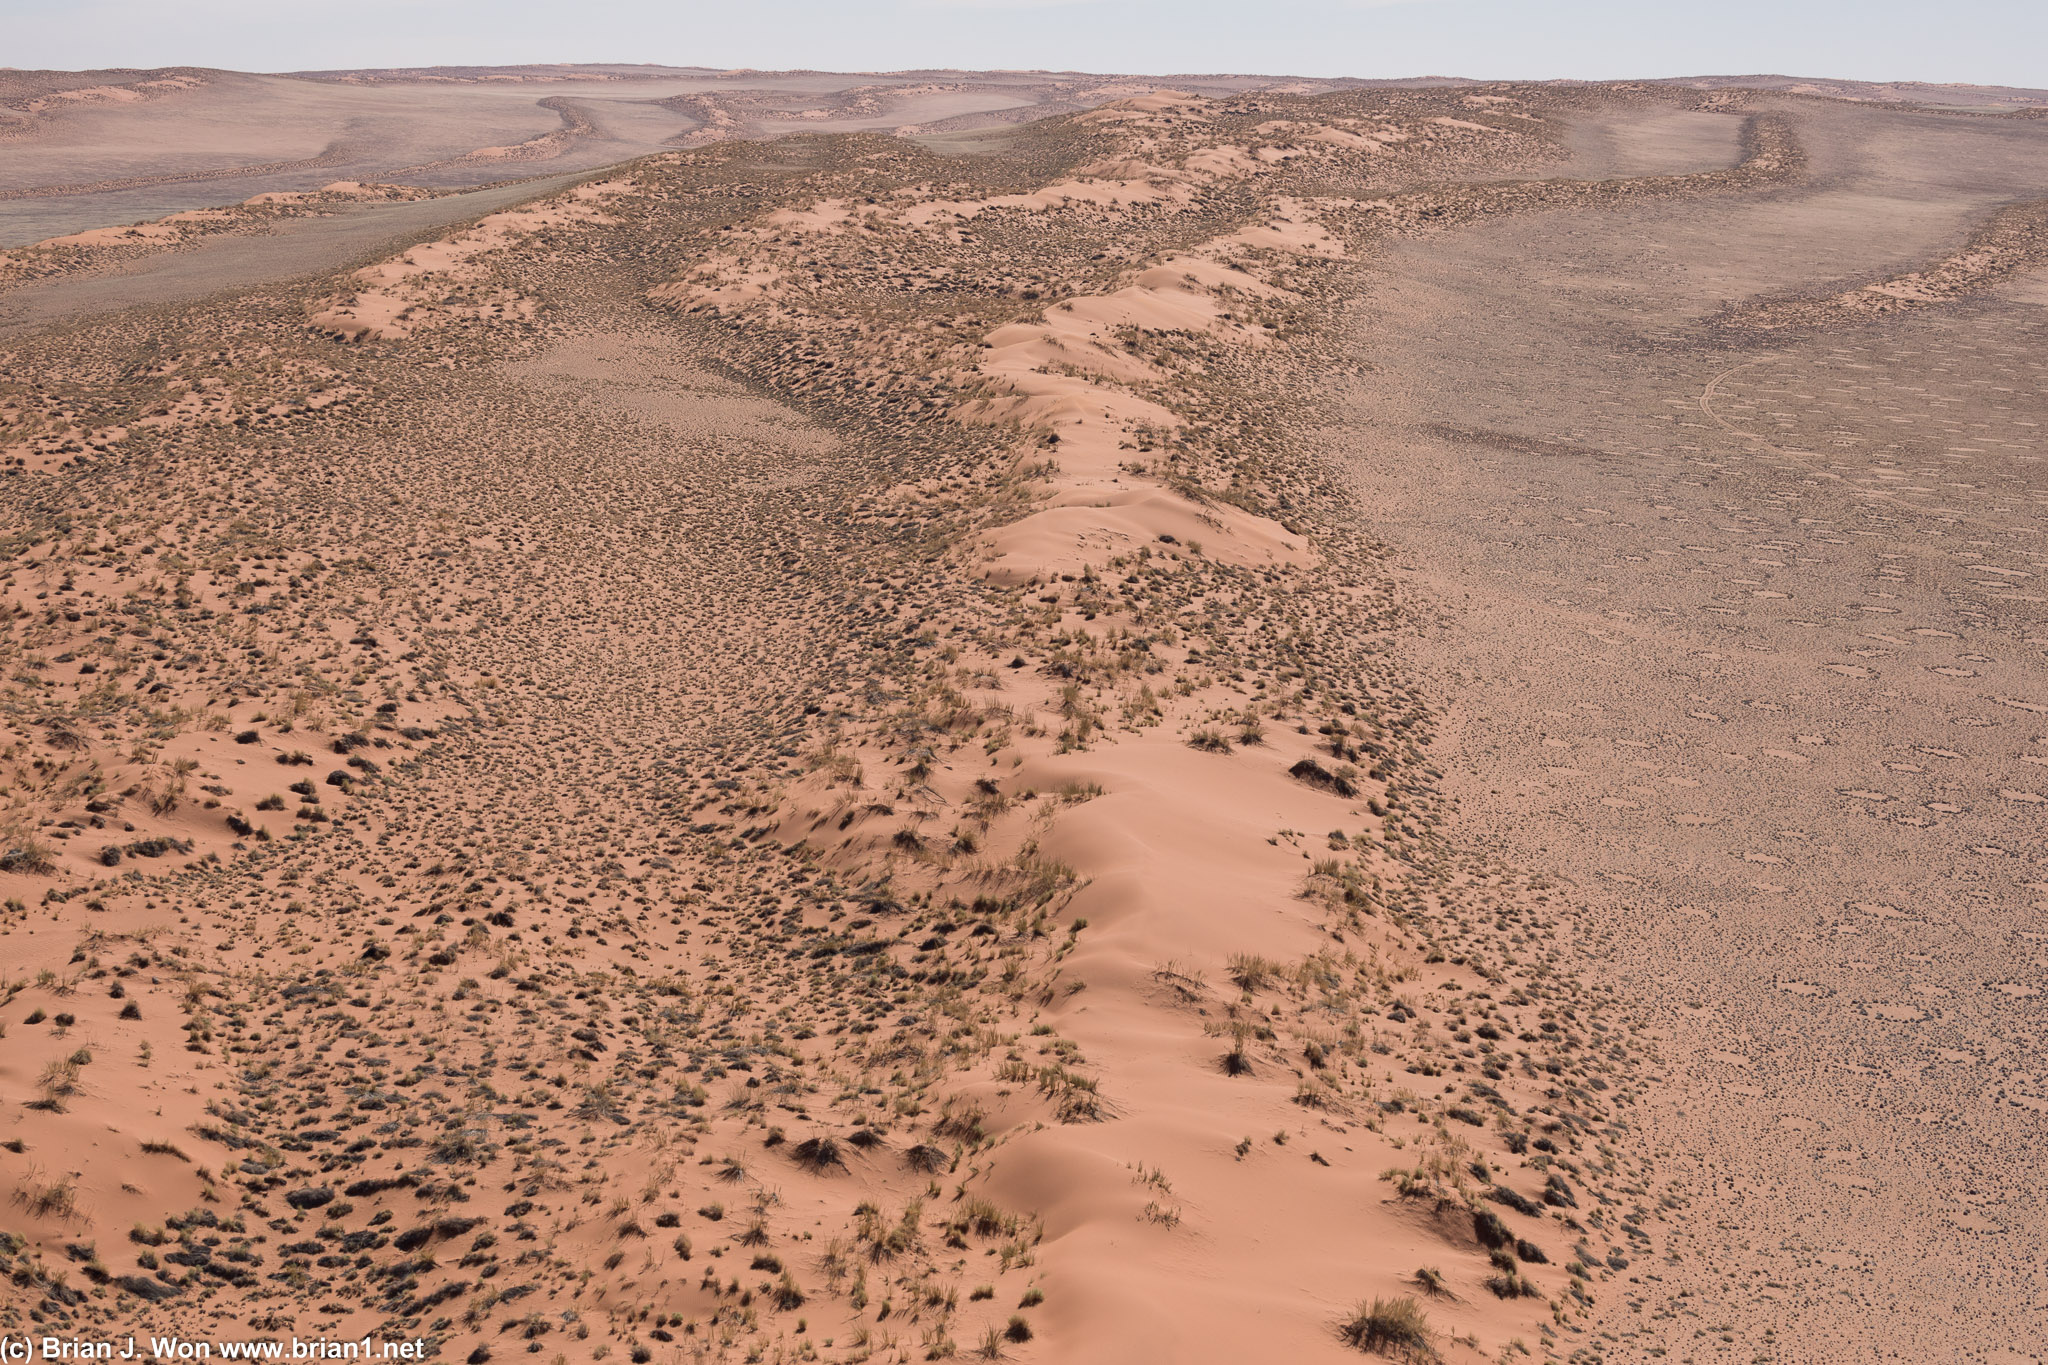 Shifting from sand dunes to fairy circles.